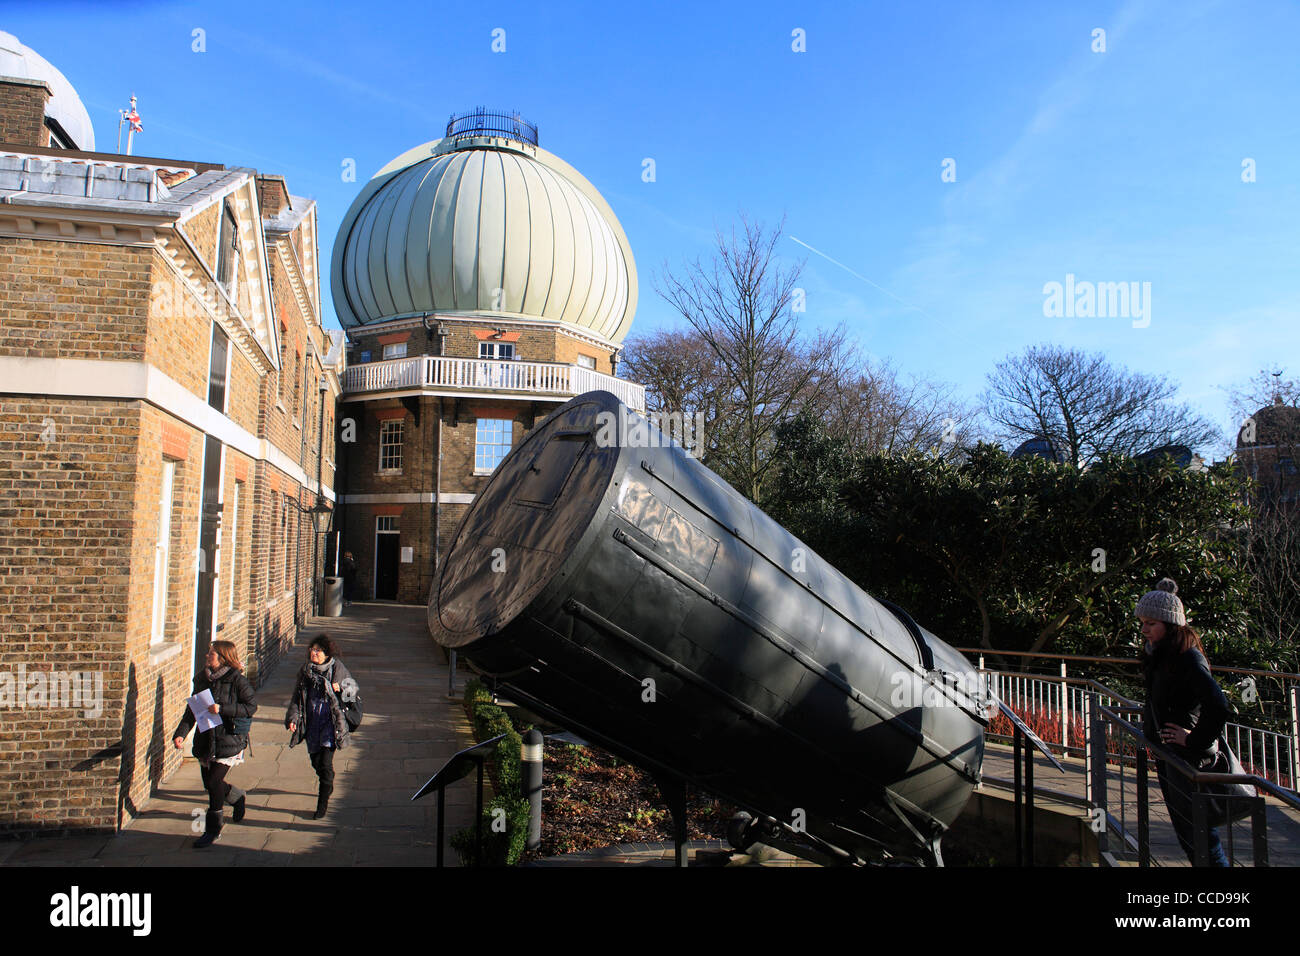 Regno Unito South London Greenwich royal Observatory di Flamsteed house Foto Stock